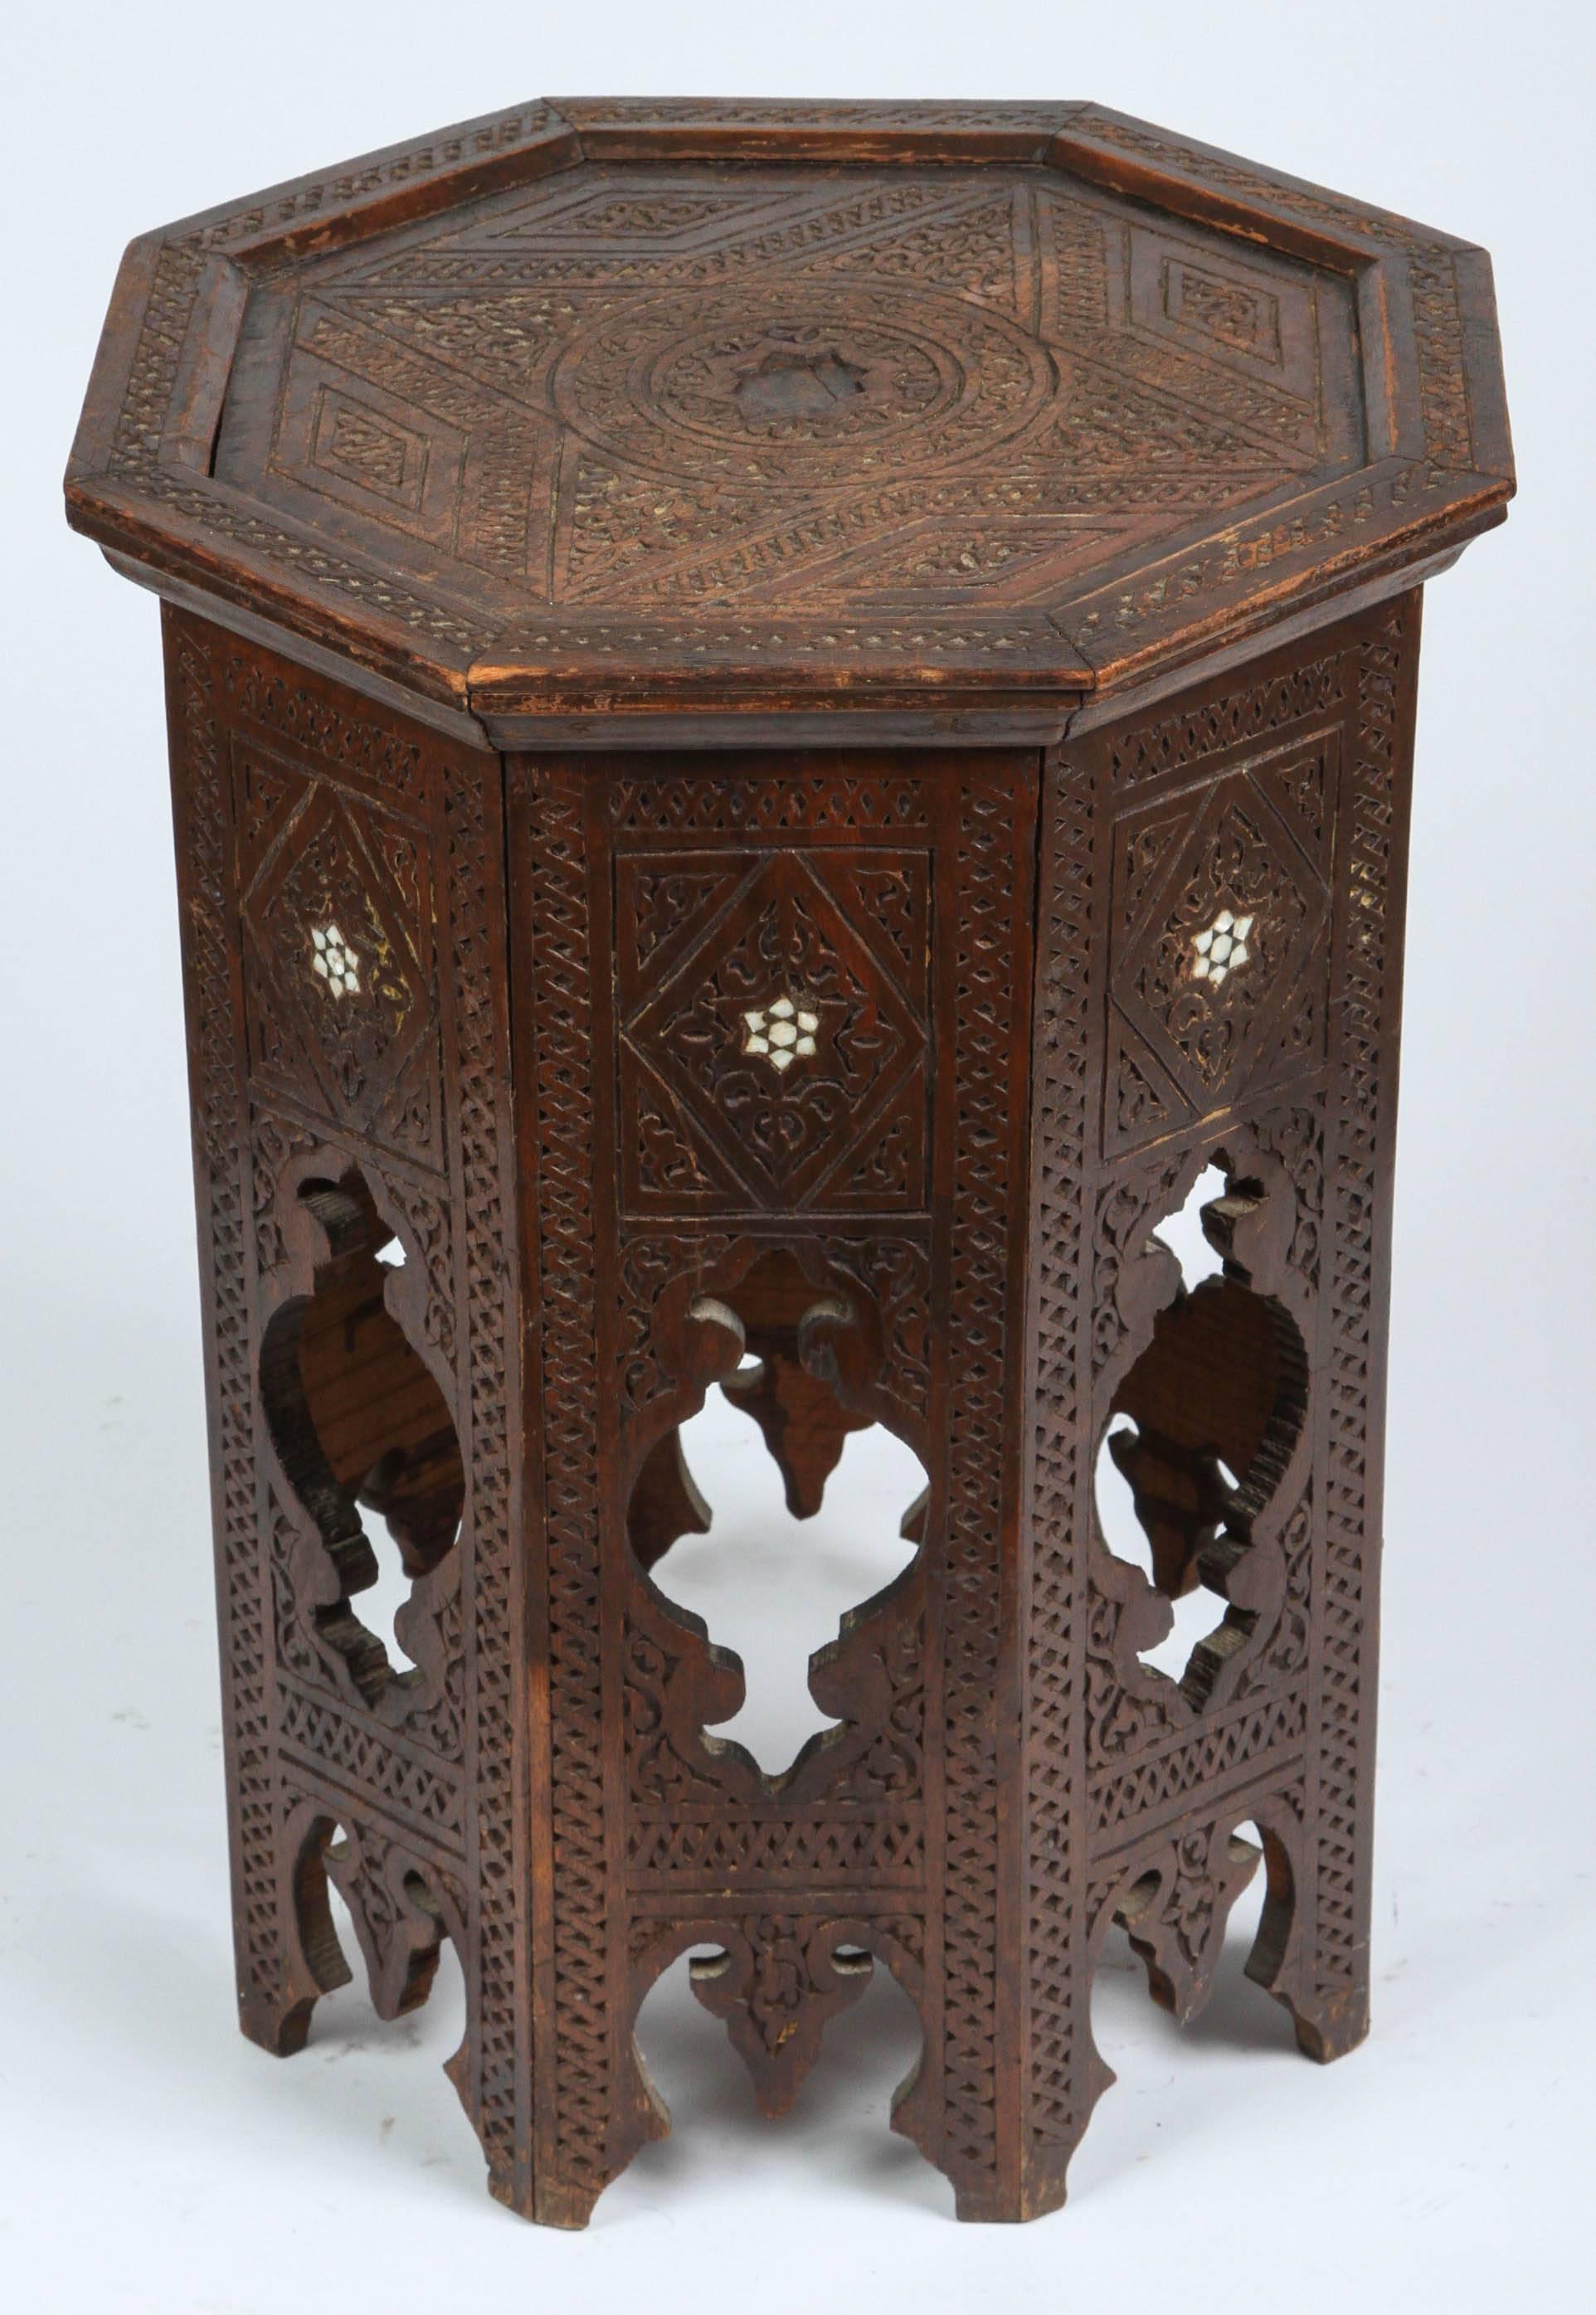 Antique 19th century Syrian octagonal side tea table, hand-carved and inlaid with mother-of-pearl.
Hand-carved with intricate Moorish designs.
Great hand cut on all sides.
Missing some inlay on top.